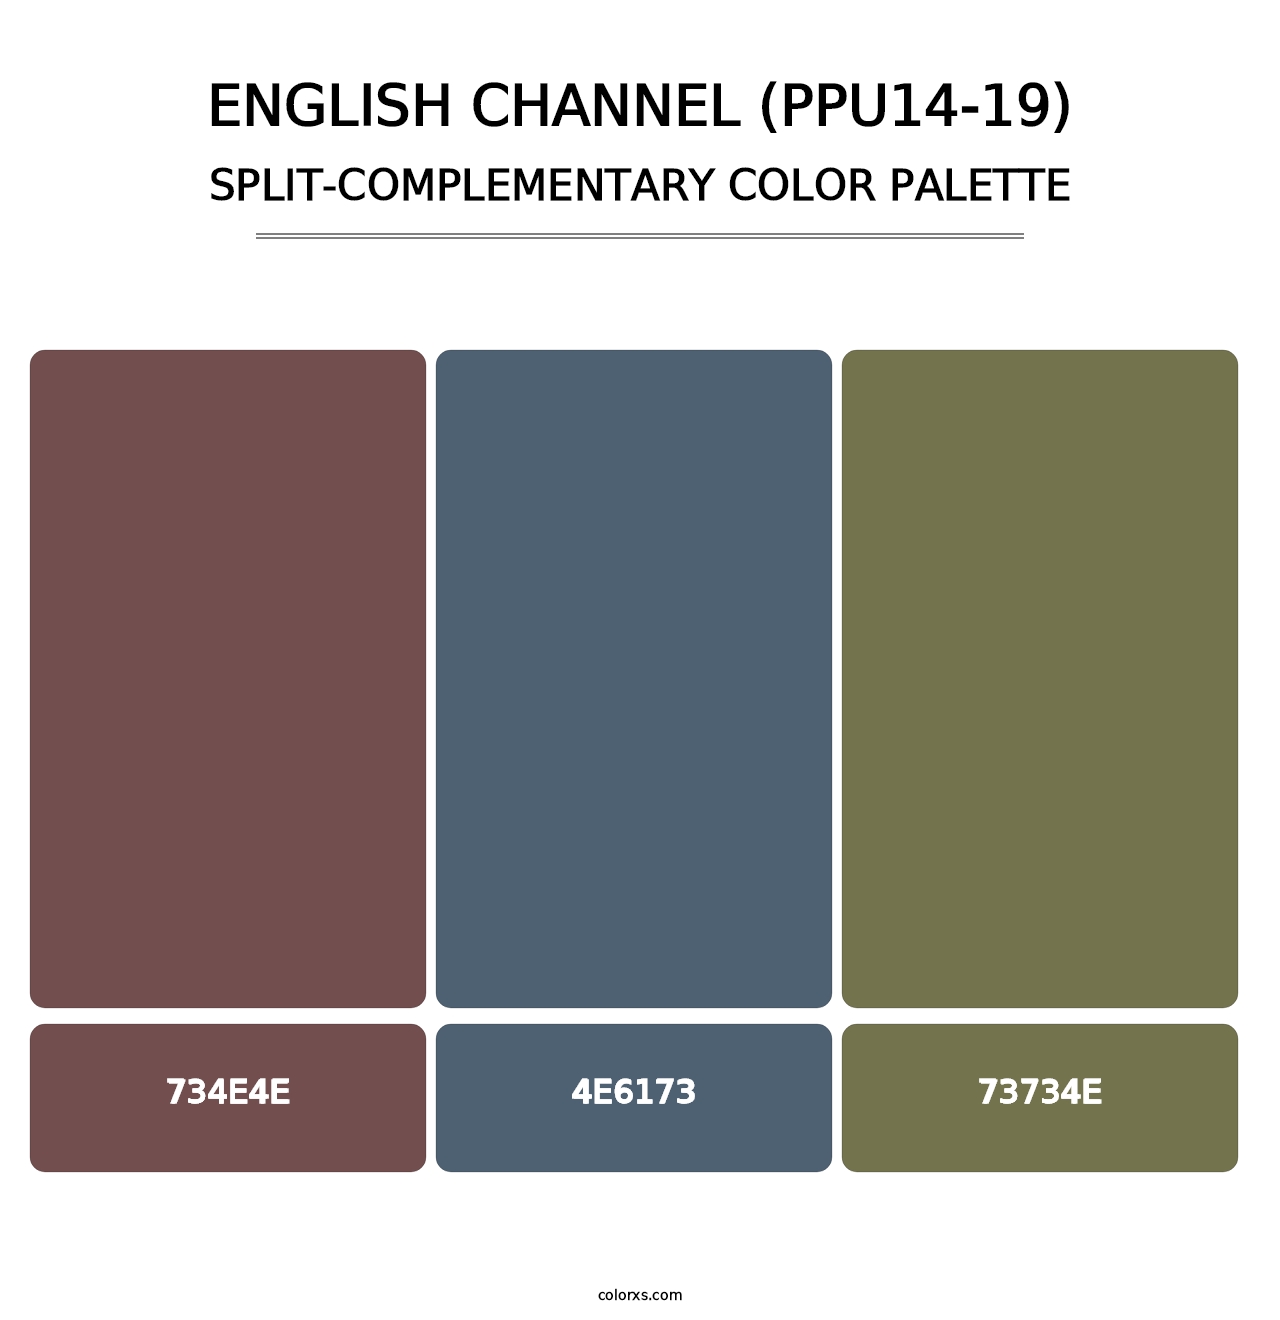 English Channel (PPU14-19) - Split-Complementary Color Palette